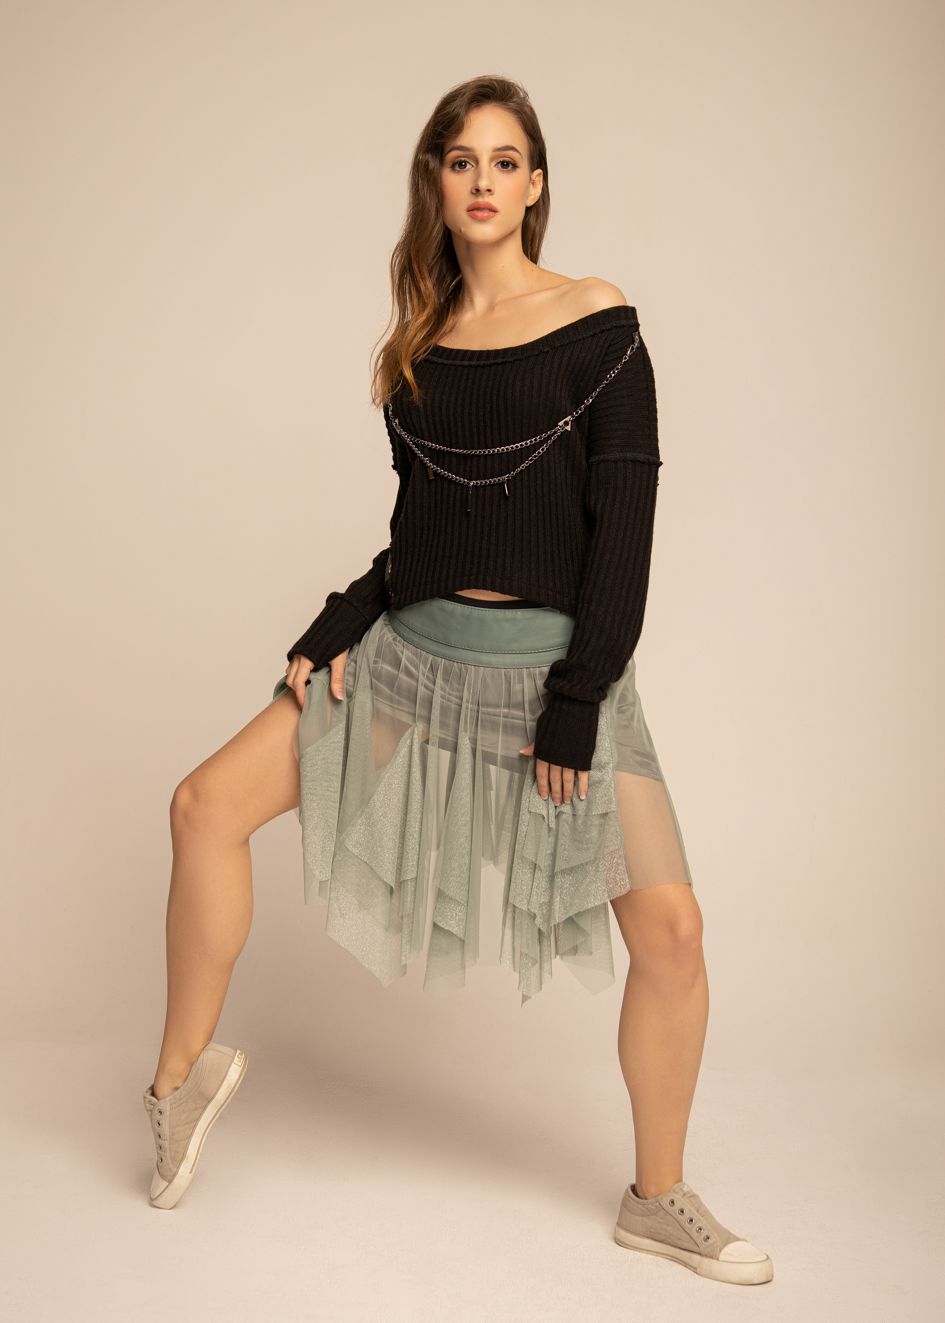 220004 WOOL SWEATER WITH A BOAT NECKLINE AND CHAIN BLACK - By Rieske image 1